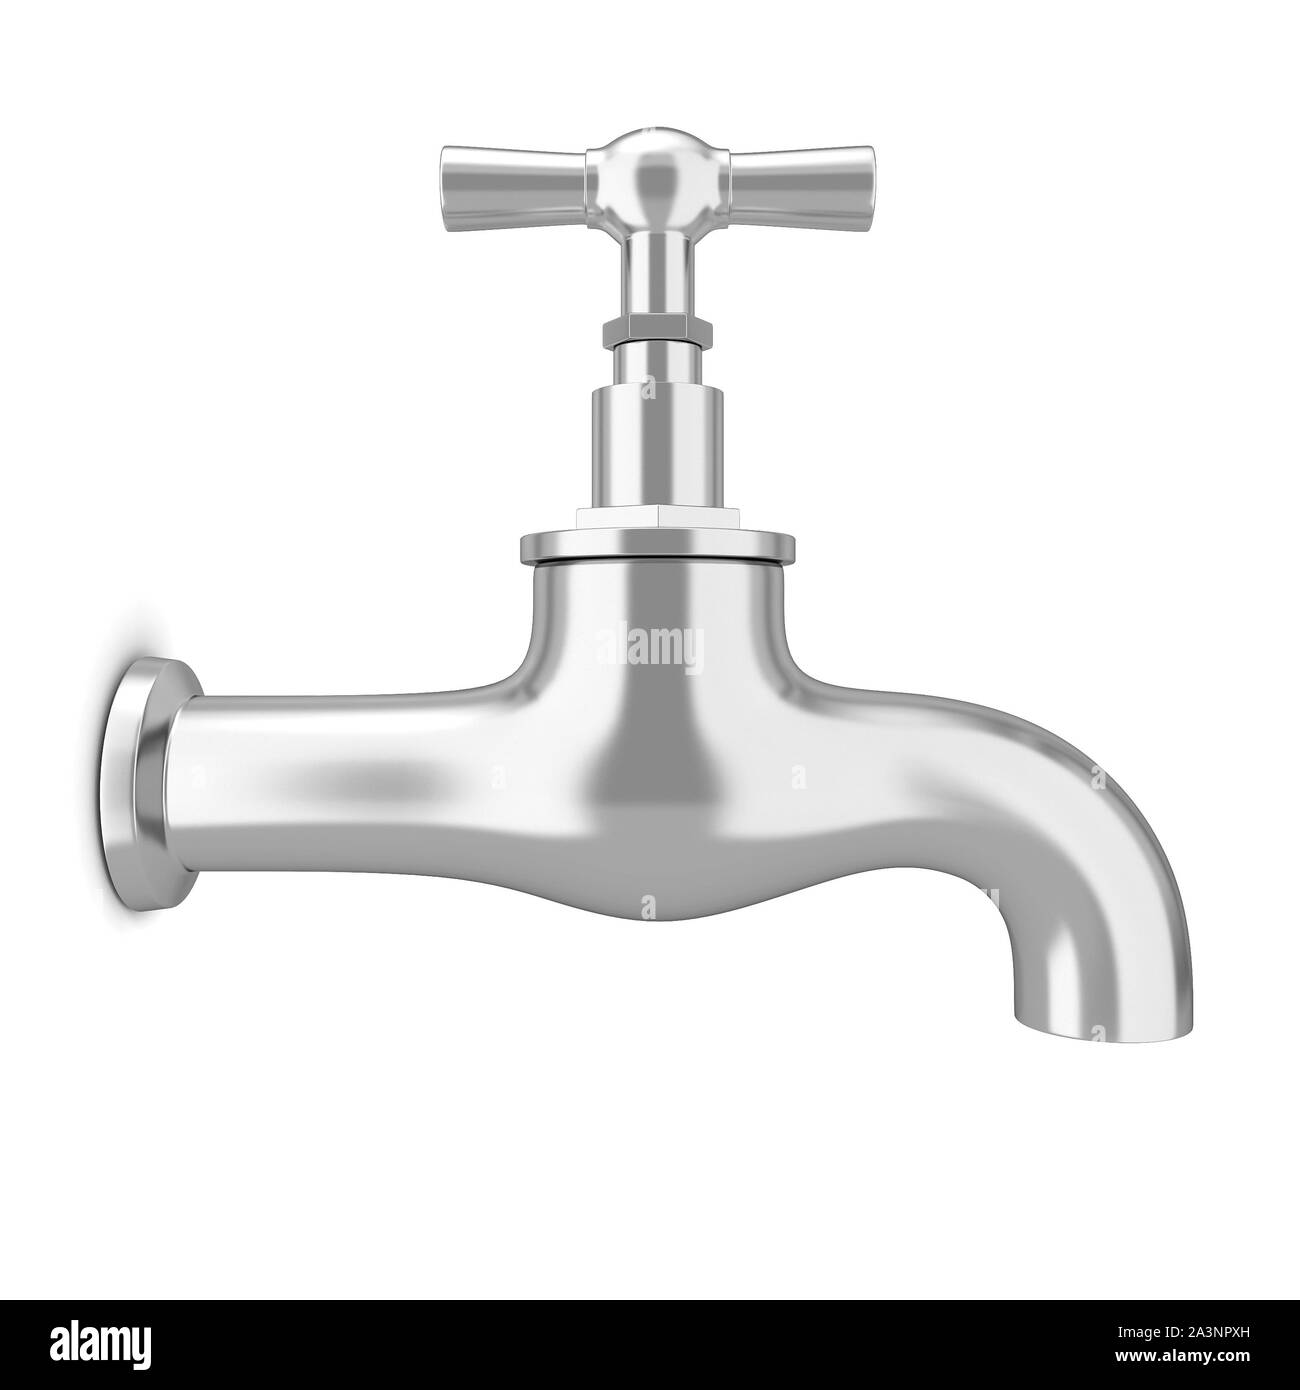 Water tap. 3d illustration isolated on white background Stock Photo - Alamy